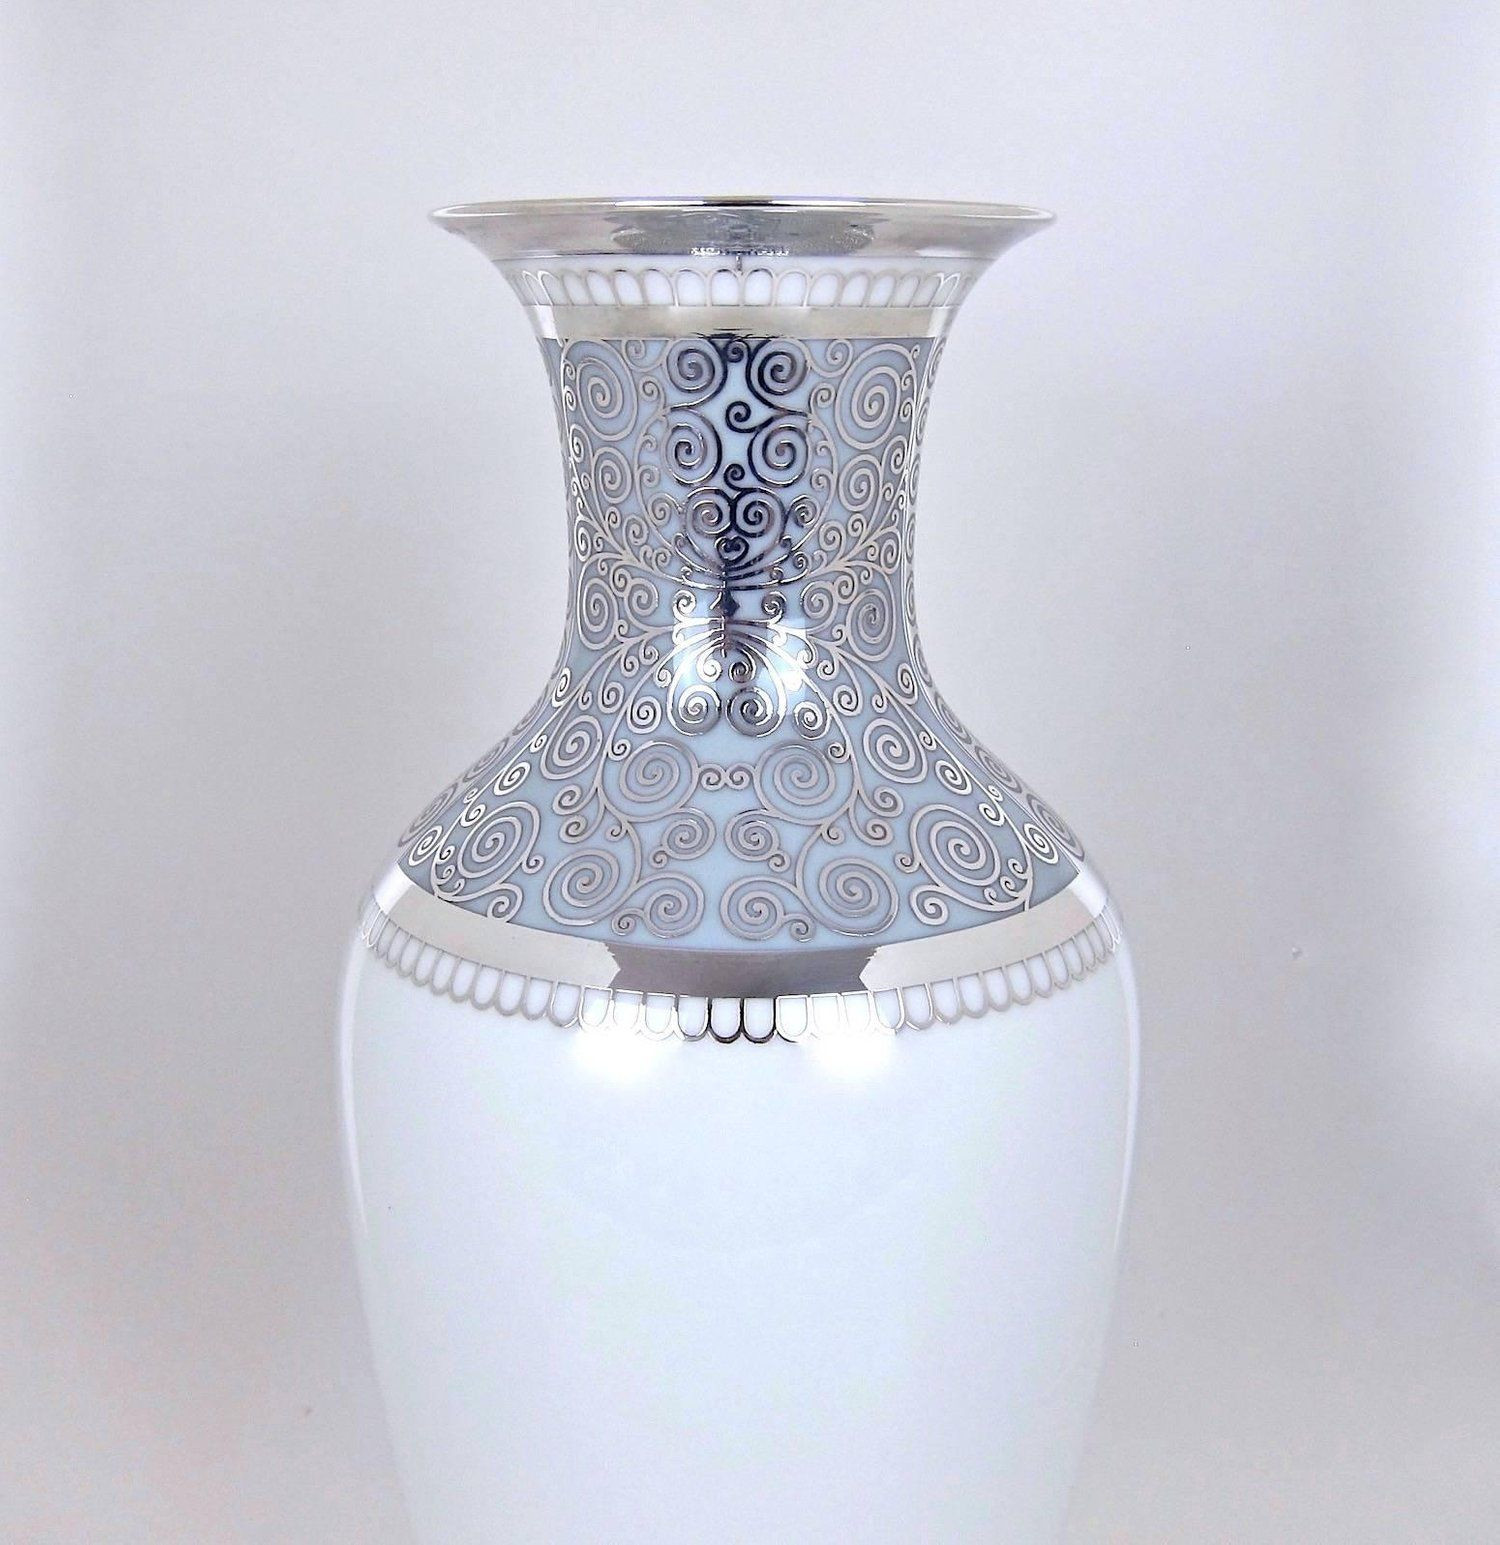 18 attractive Handmade Ceramic Vases for Sale 2022 free download handmade ceramic vases for sale of 18 mid century glass vase the weekly world in 18 mid century glass vase